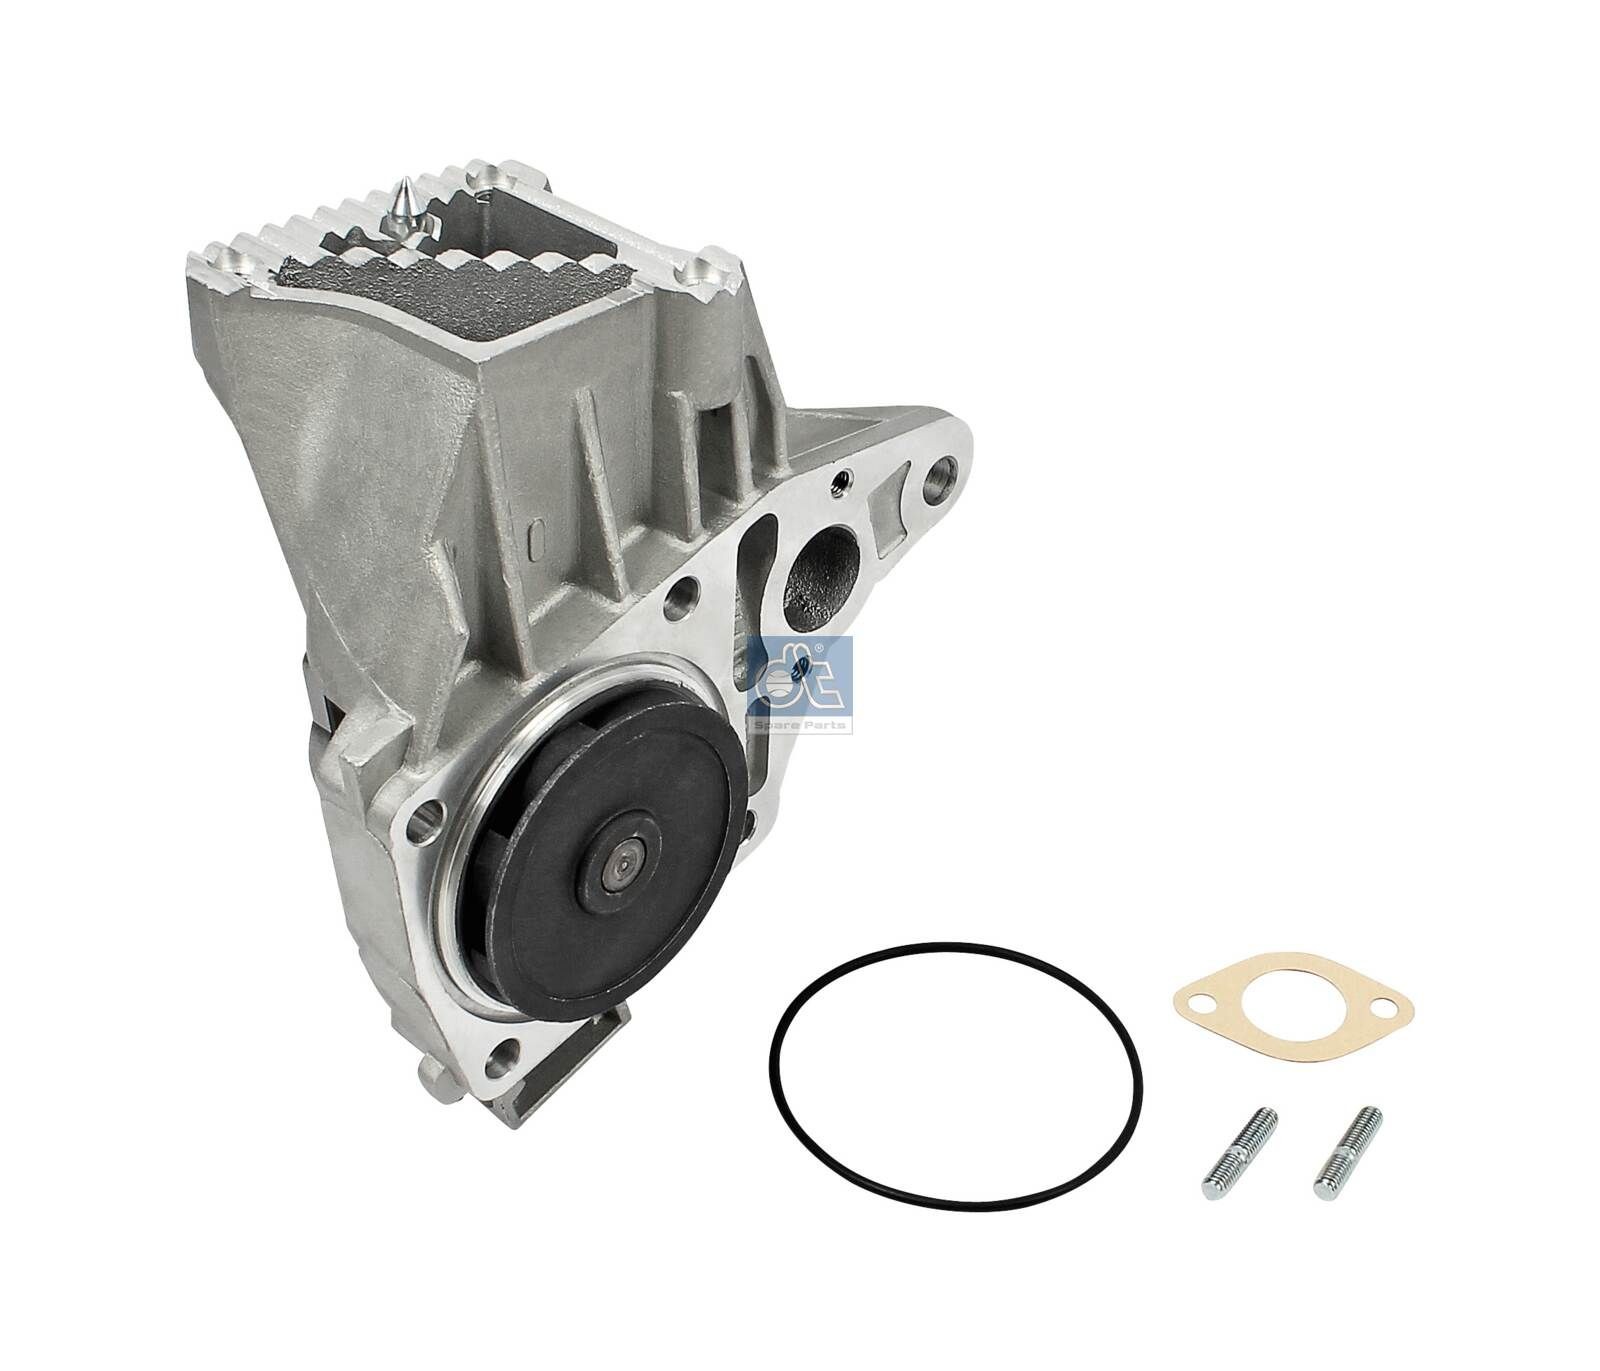 Opel VECTRA Engine water pump 9975489 DT Spare Parts 6.30031 online buy